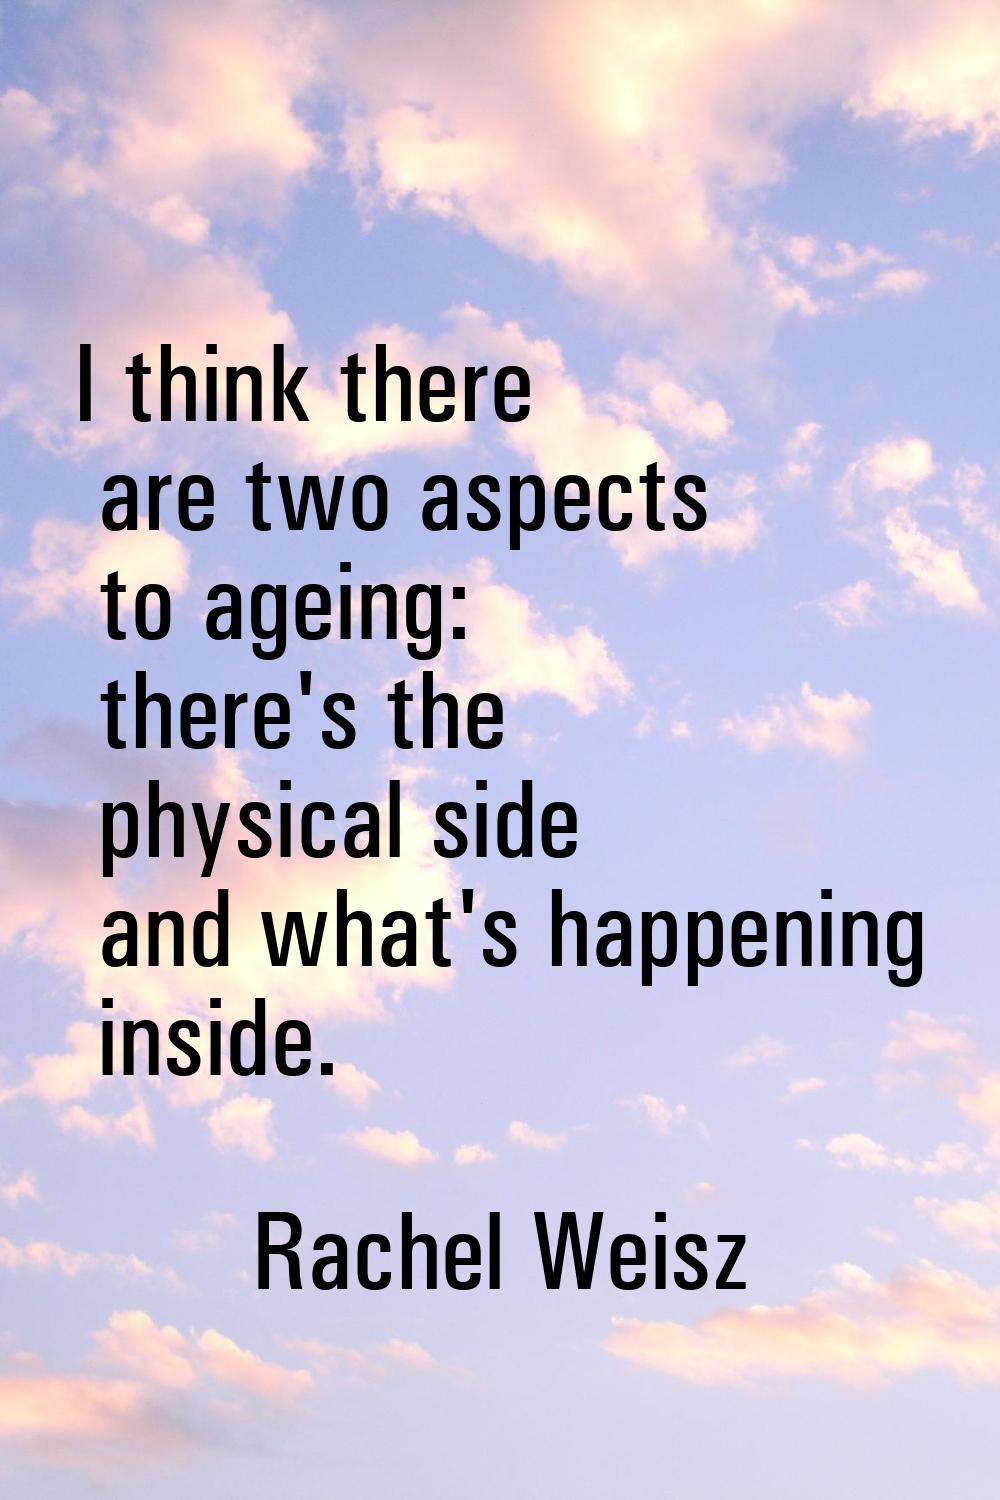 I think there are two aspects to ageing: there's the physical side and what's happening inside.